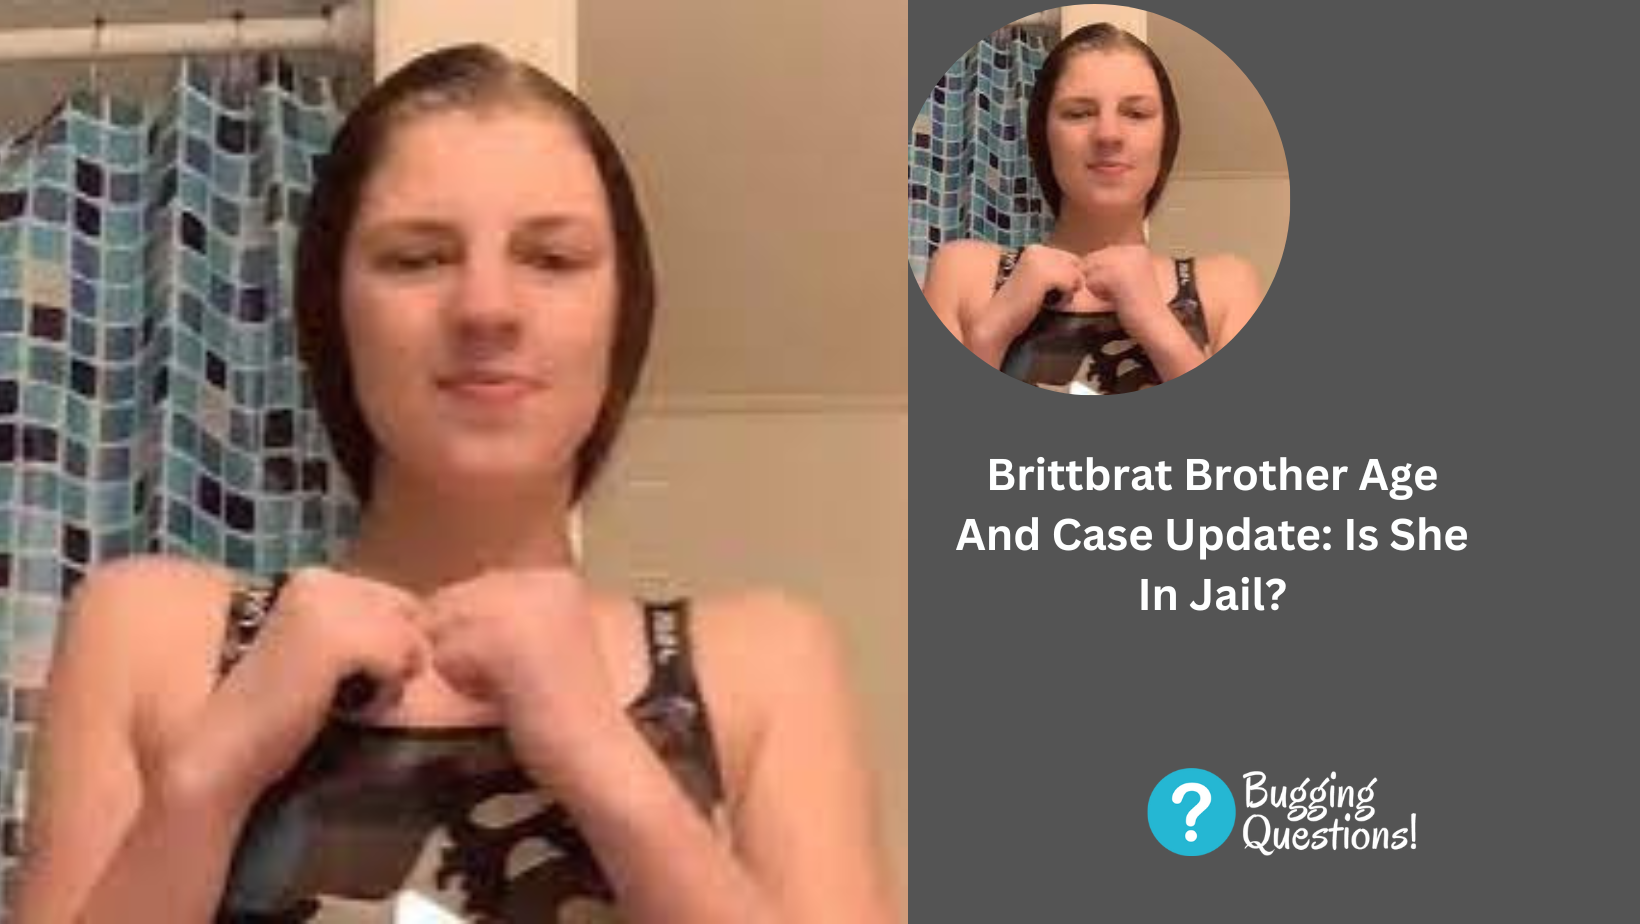 Brittbrat Brother Age And Case Update: Is She In Jail?